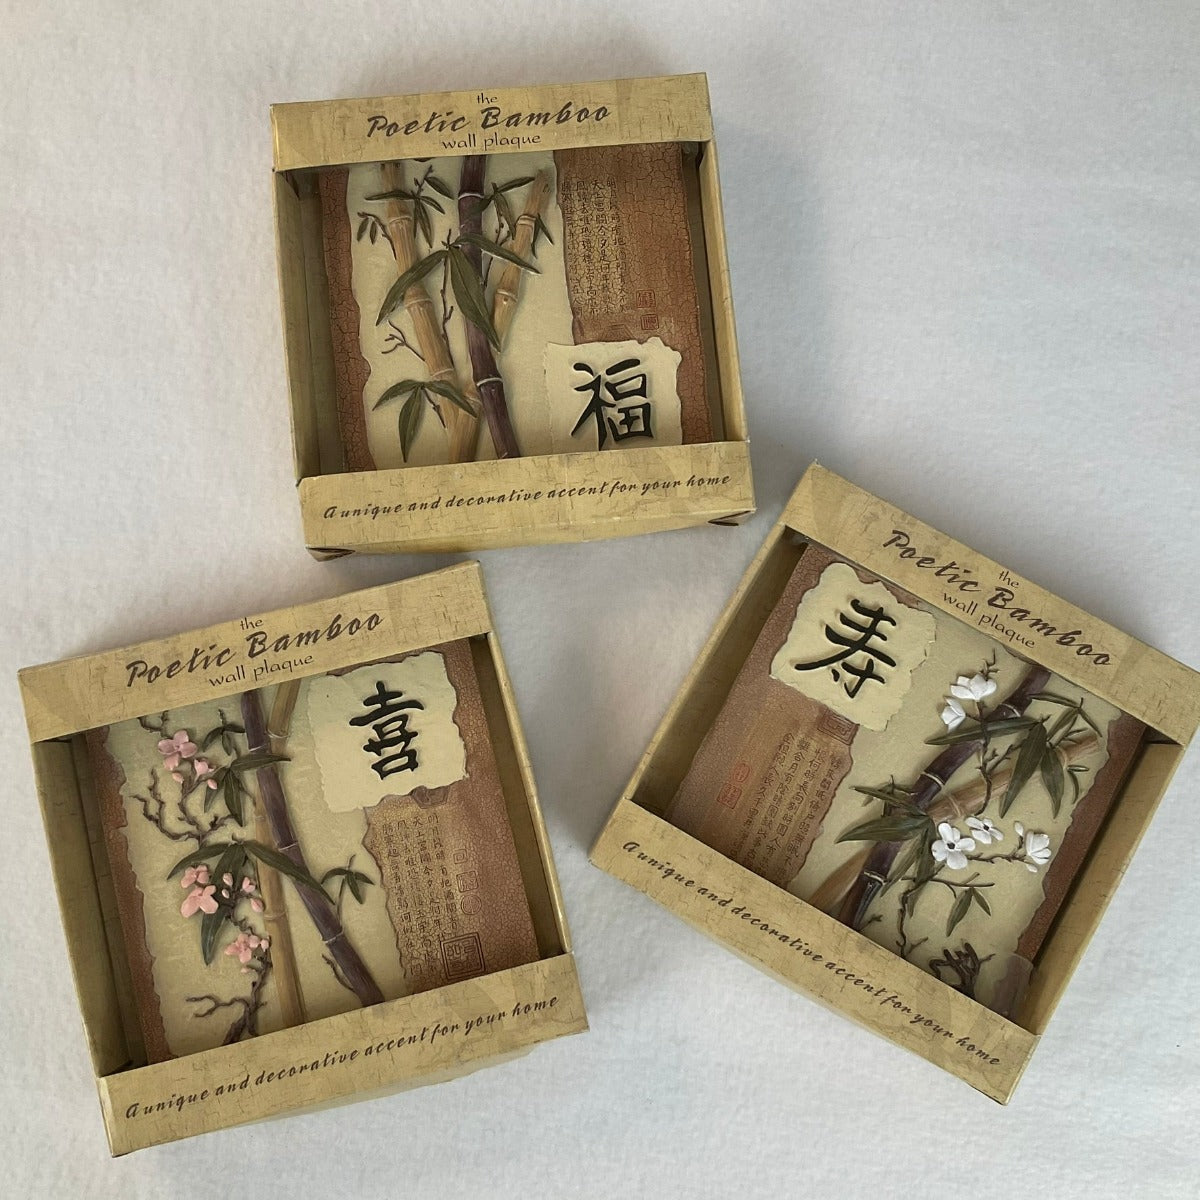 Poetic Bamboo Wall Plaques - Longevity / Happiness / Good Fortune